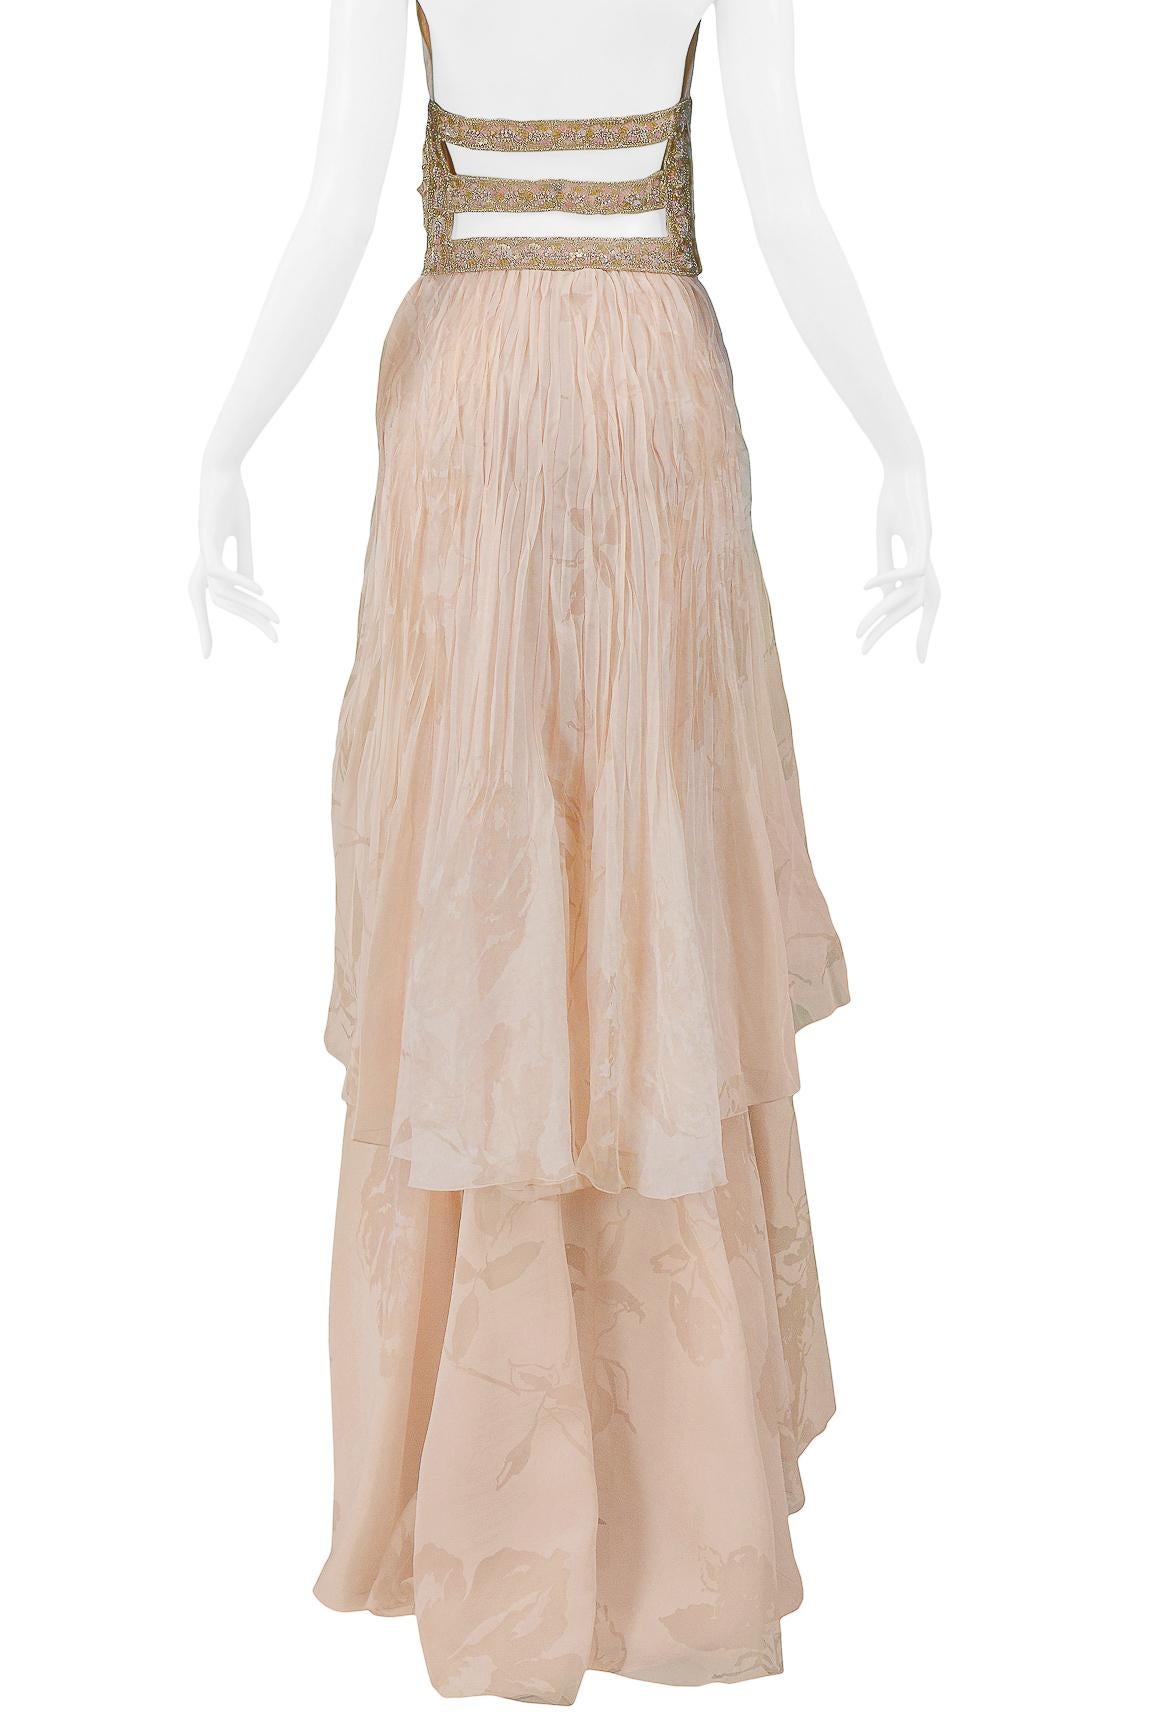 Valentino Peach Floral Silk Runway Evening Gown with Beaded Belt 2007 3